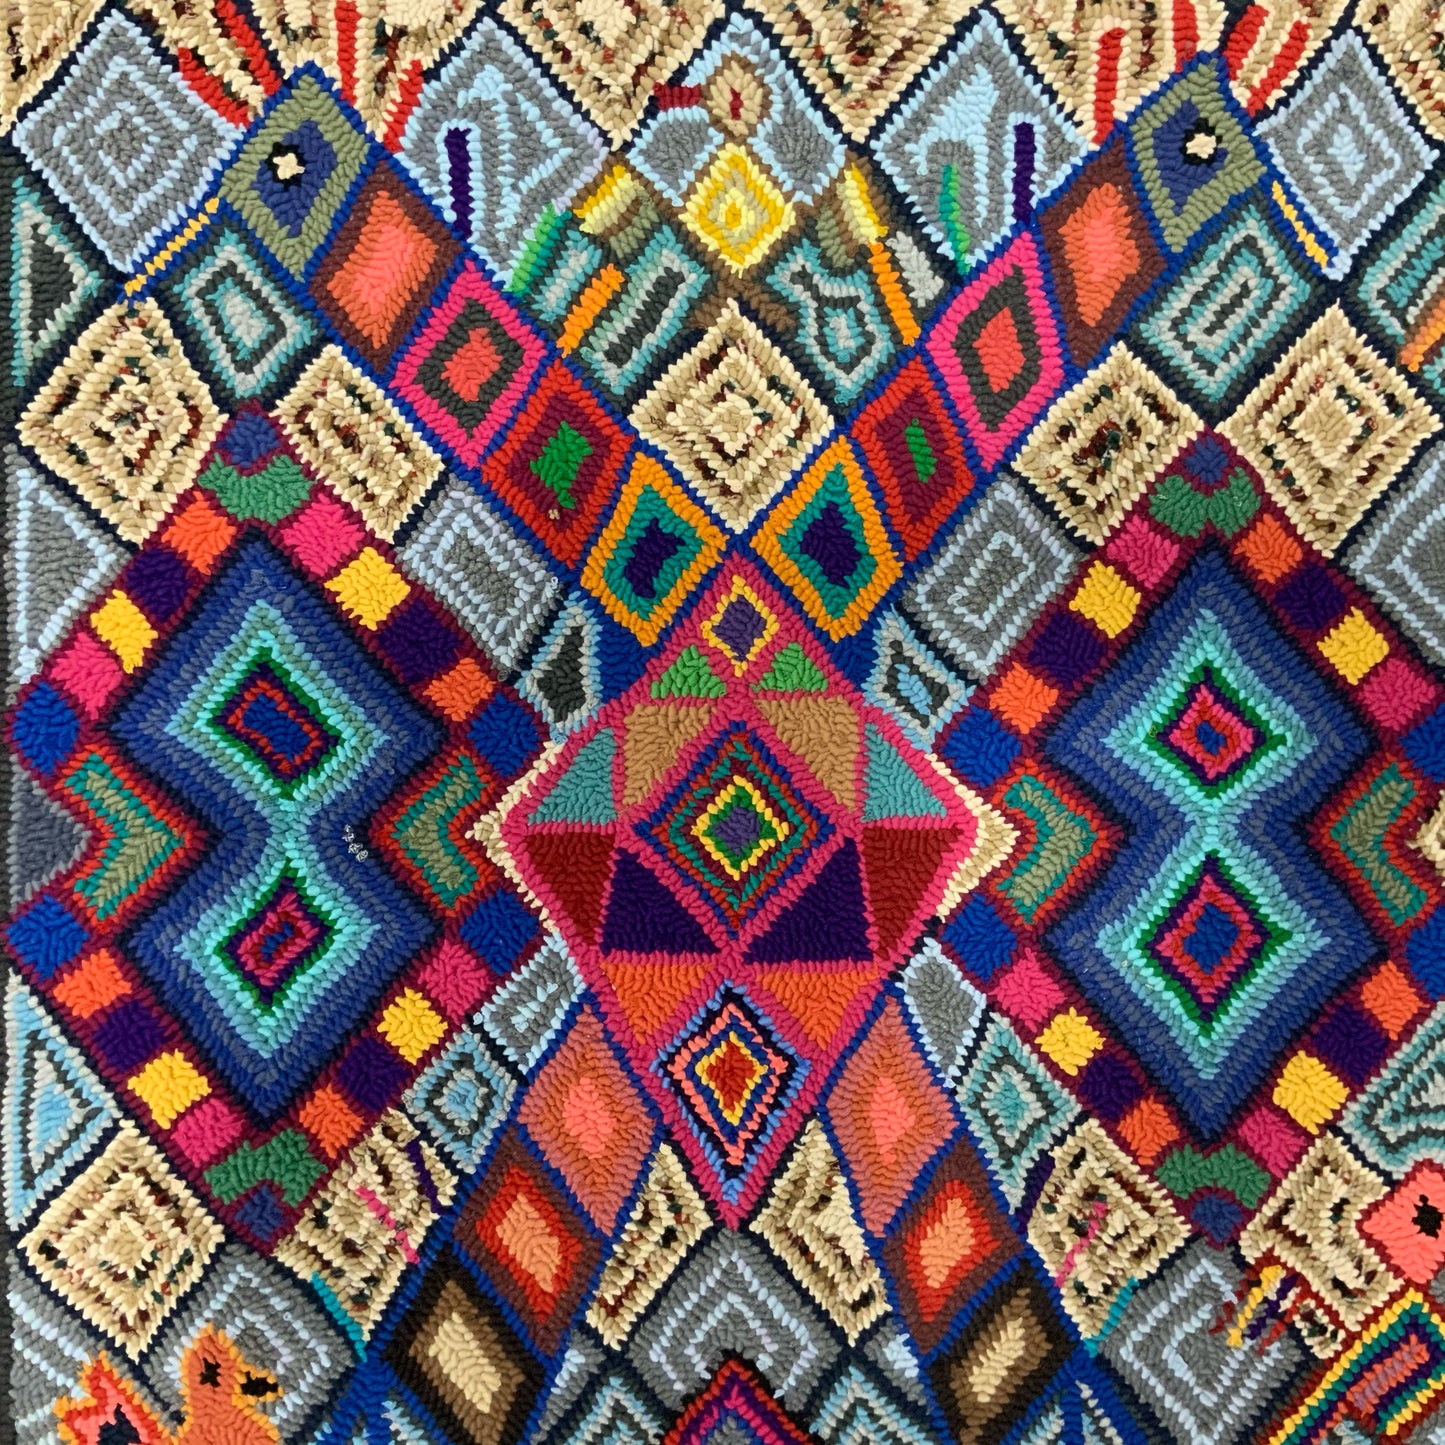 Guatemala, Multicolores, “Woven With Joy” Large Rug